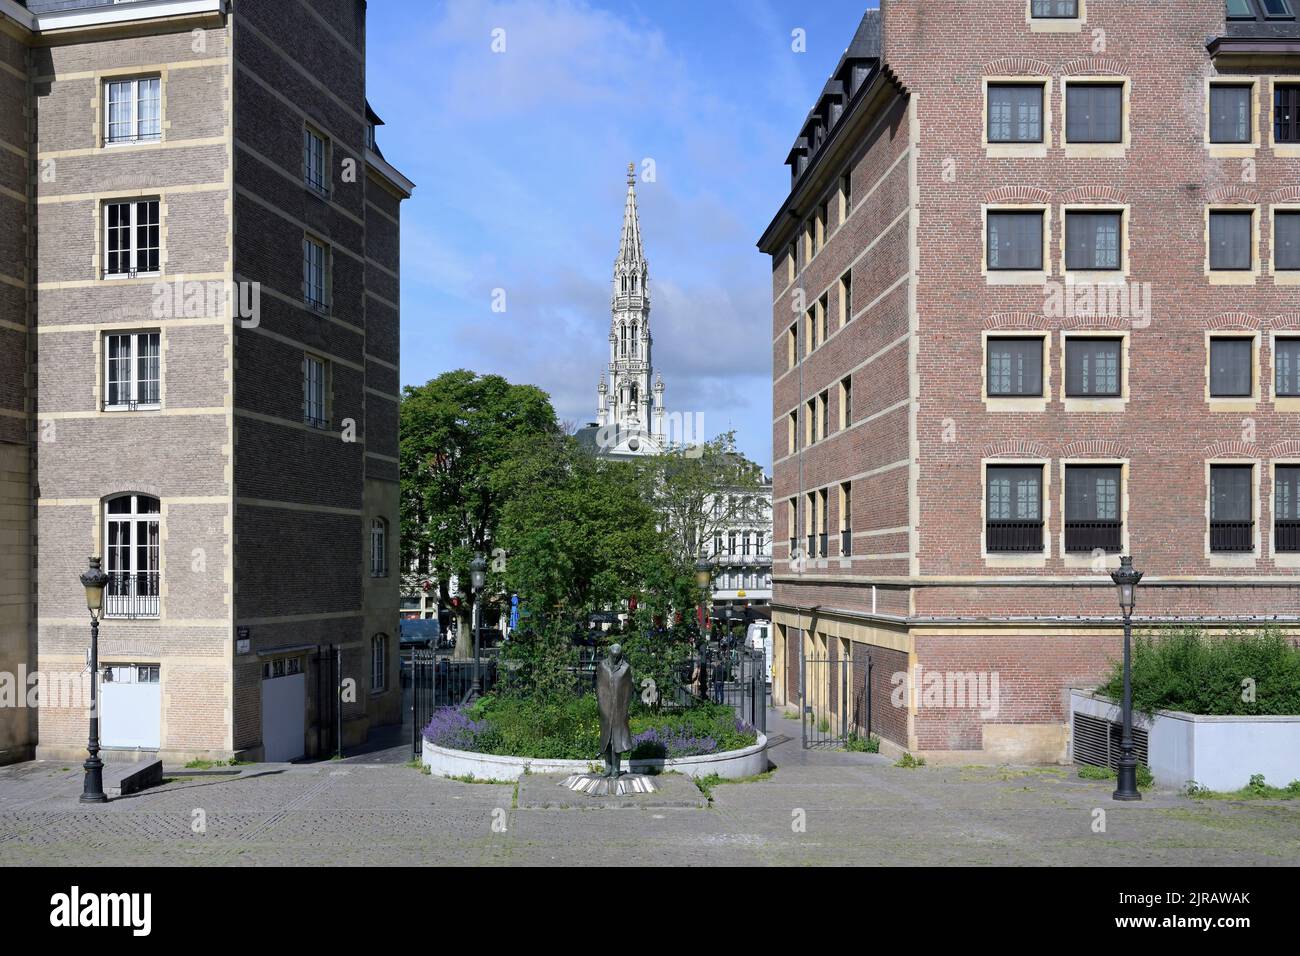 Spanish square with Bela Bartok statue, the Grand Place in the background, Brussels, Brabant, Belgium Stock Photo